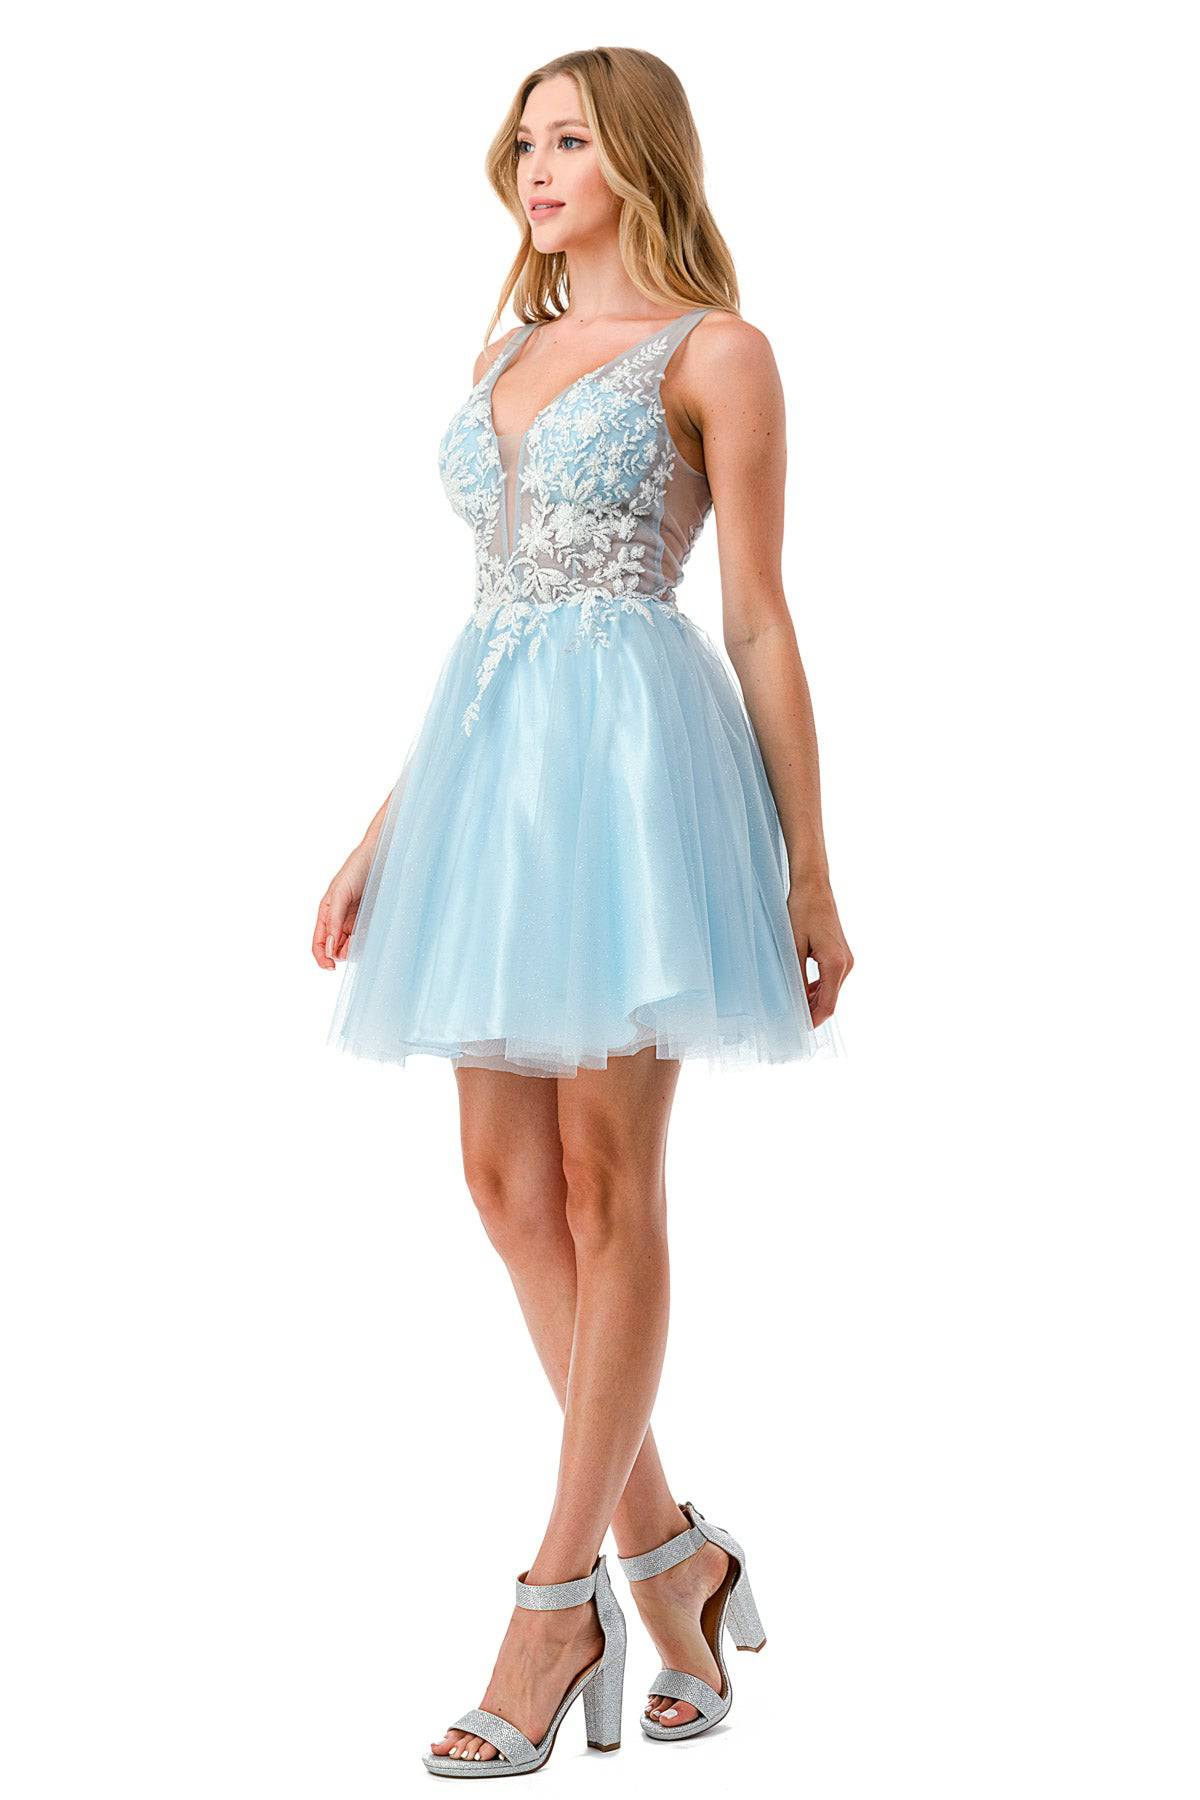 Aspeed S2724 Light Blue Lace & Sheer Short Dress with Tulle - NORMA REED